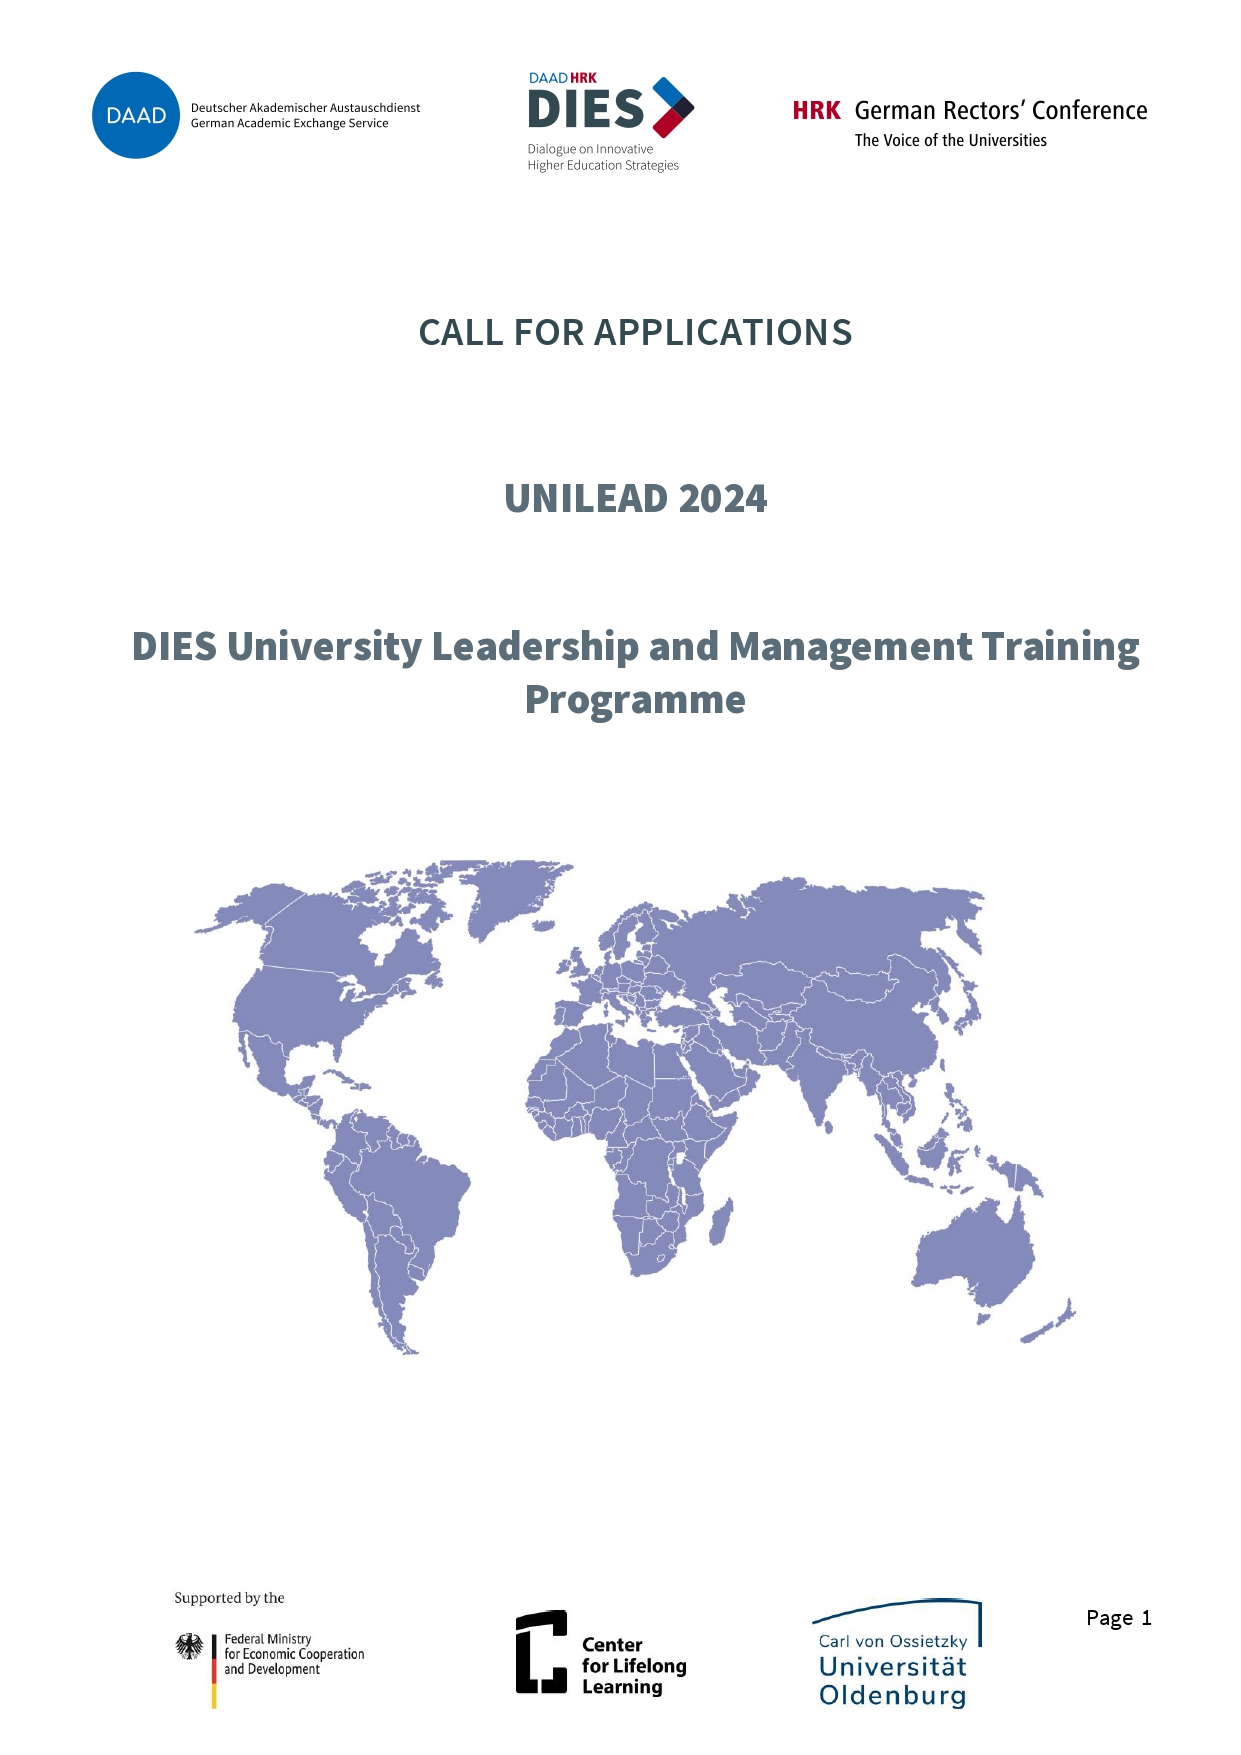 Call for Applications for the DIES Training Course “UNILEAD” 2023/24